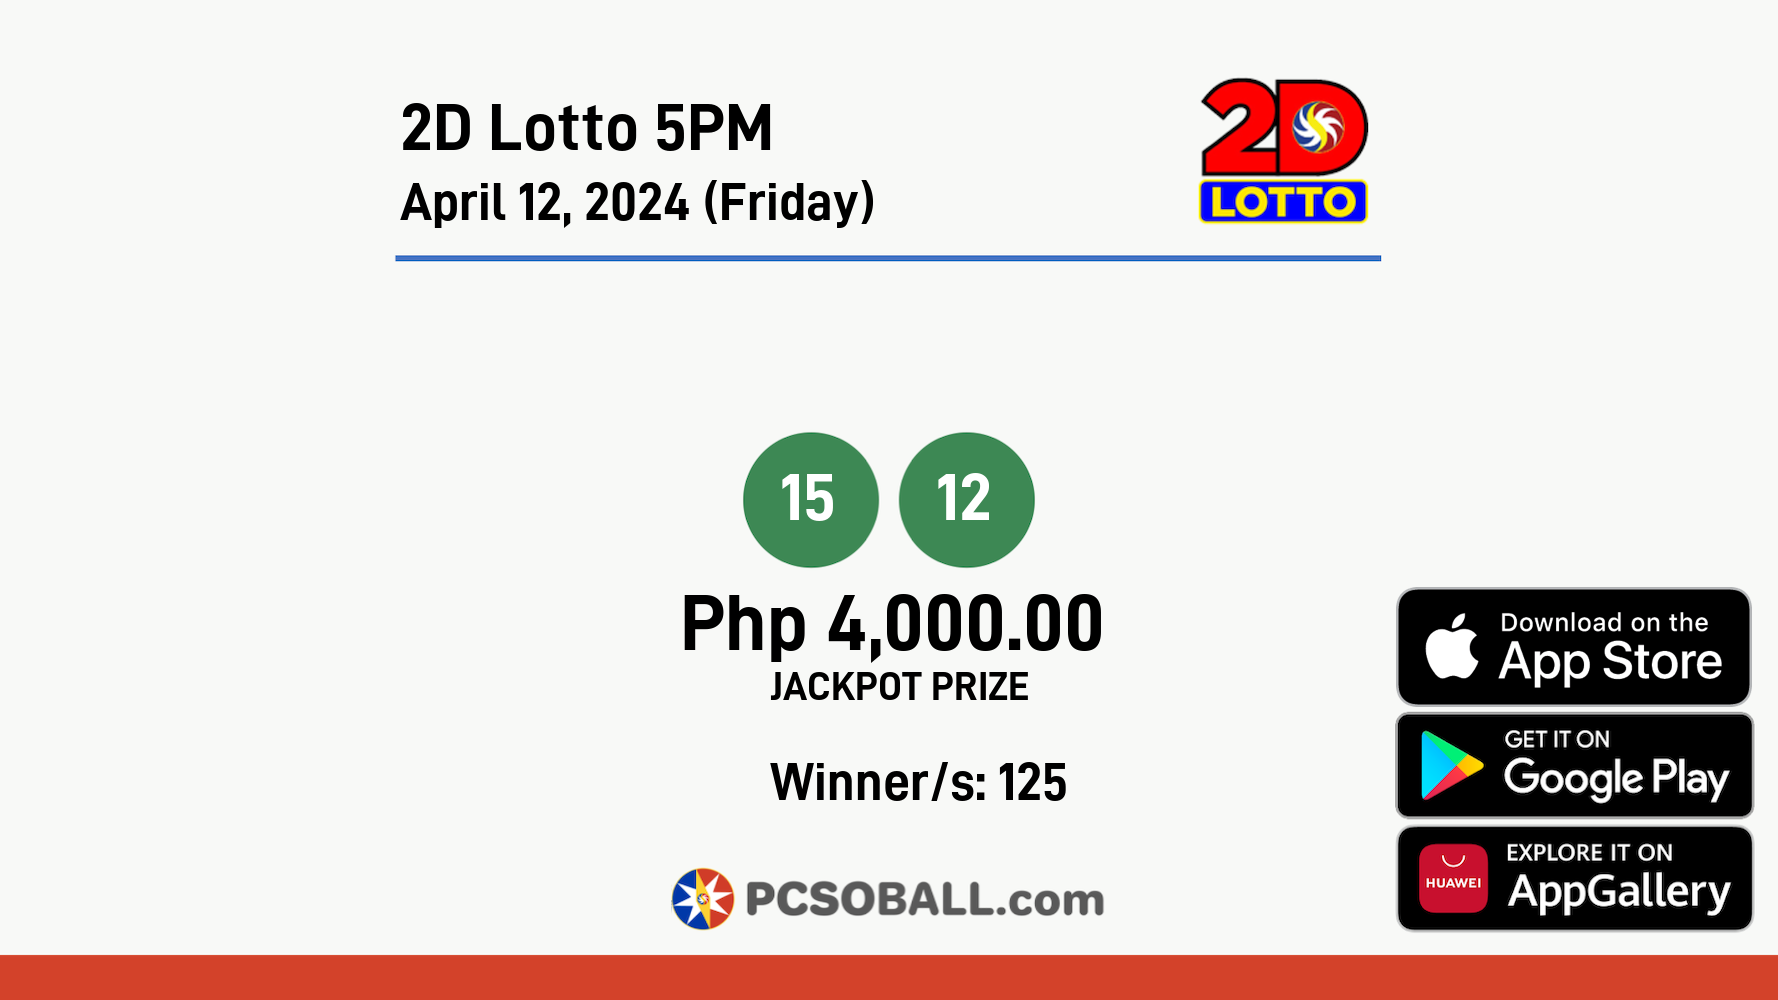 2D Lotto 5PM April 12, 2024 (Friday) Result